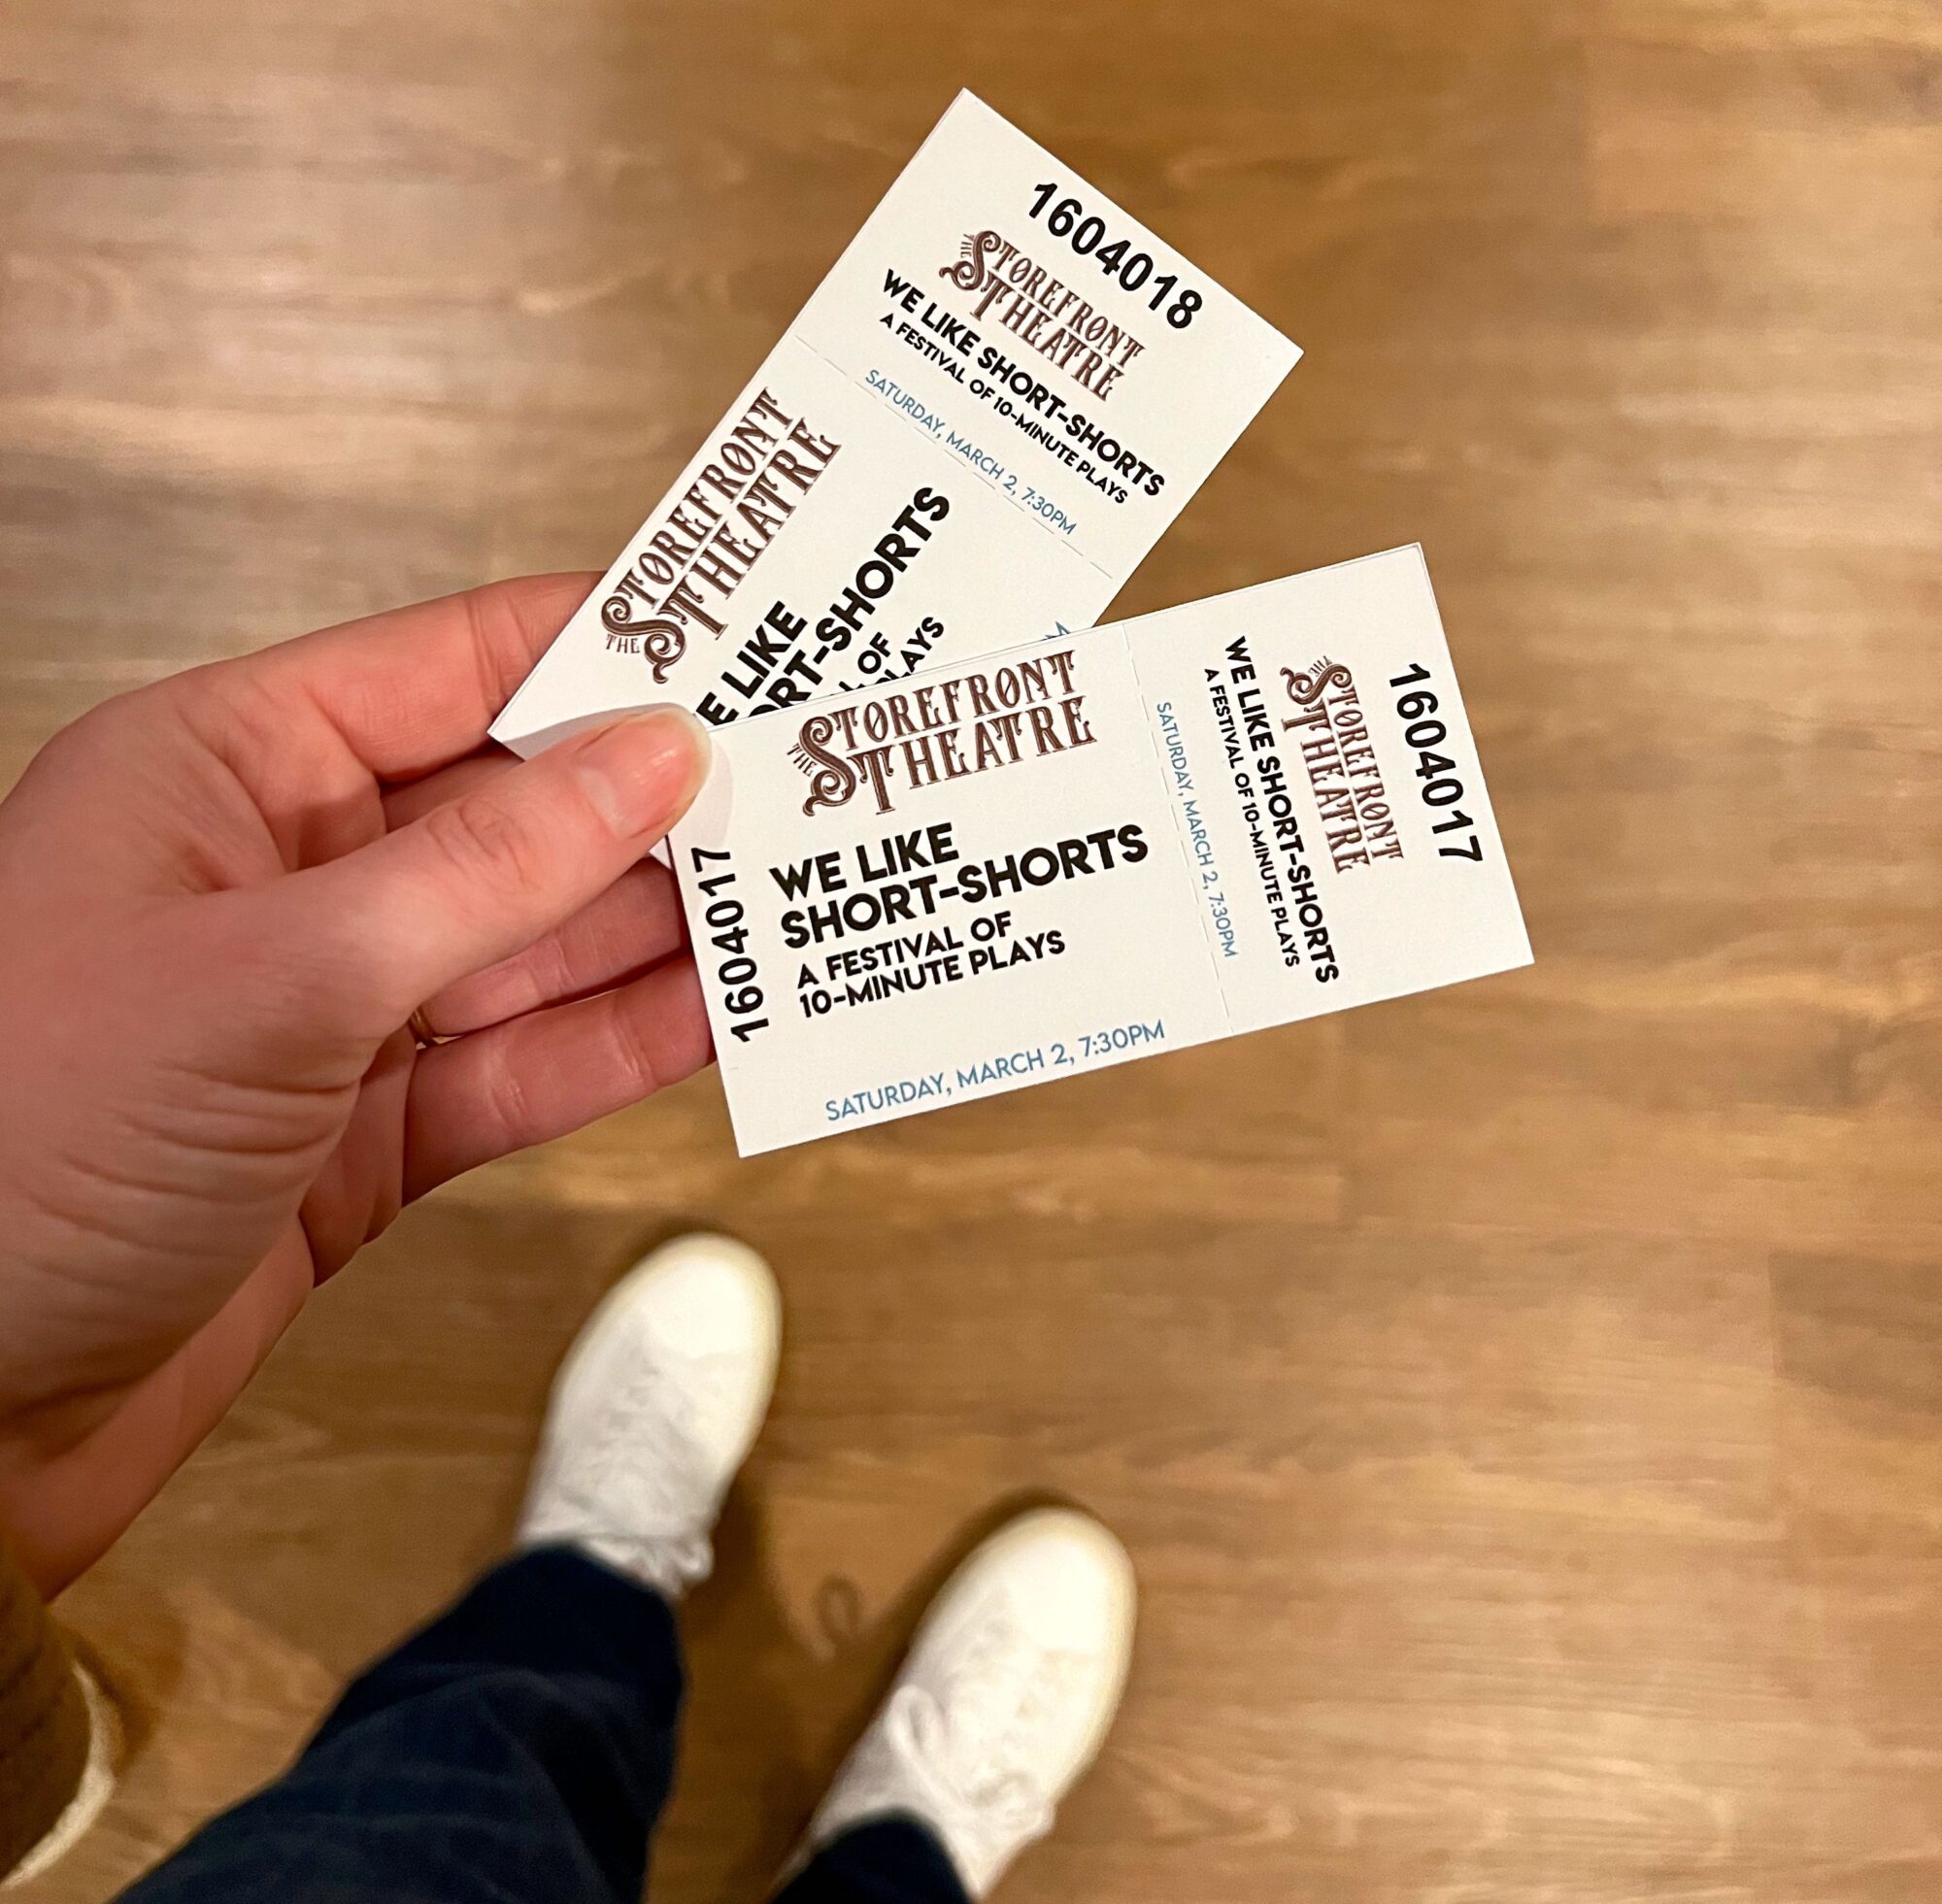 Alyssa holds a pair of tickets for The Storefront Theatre